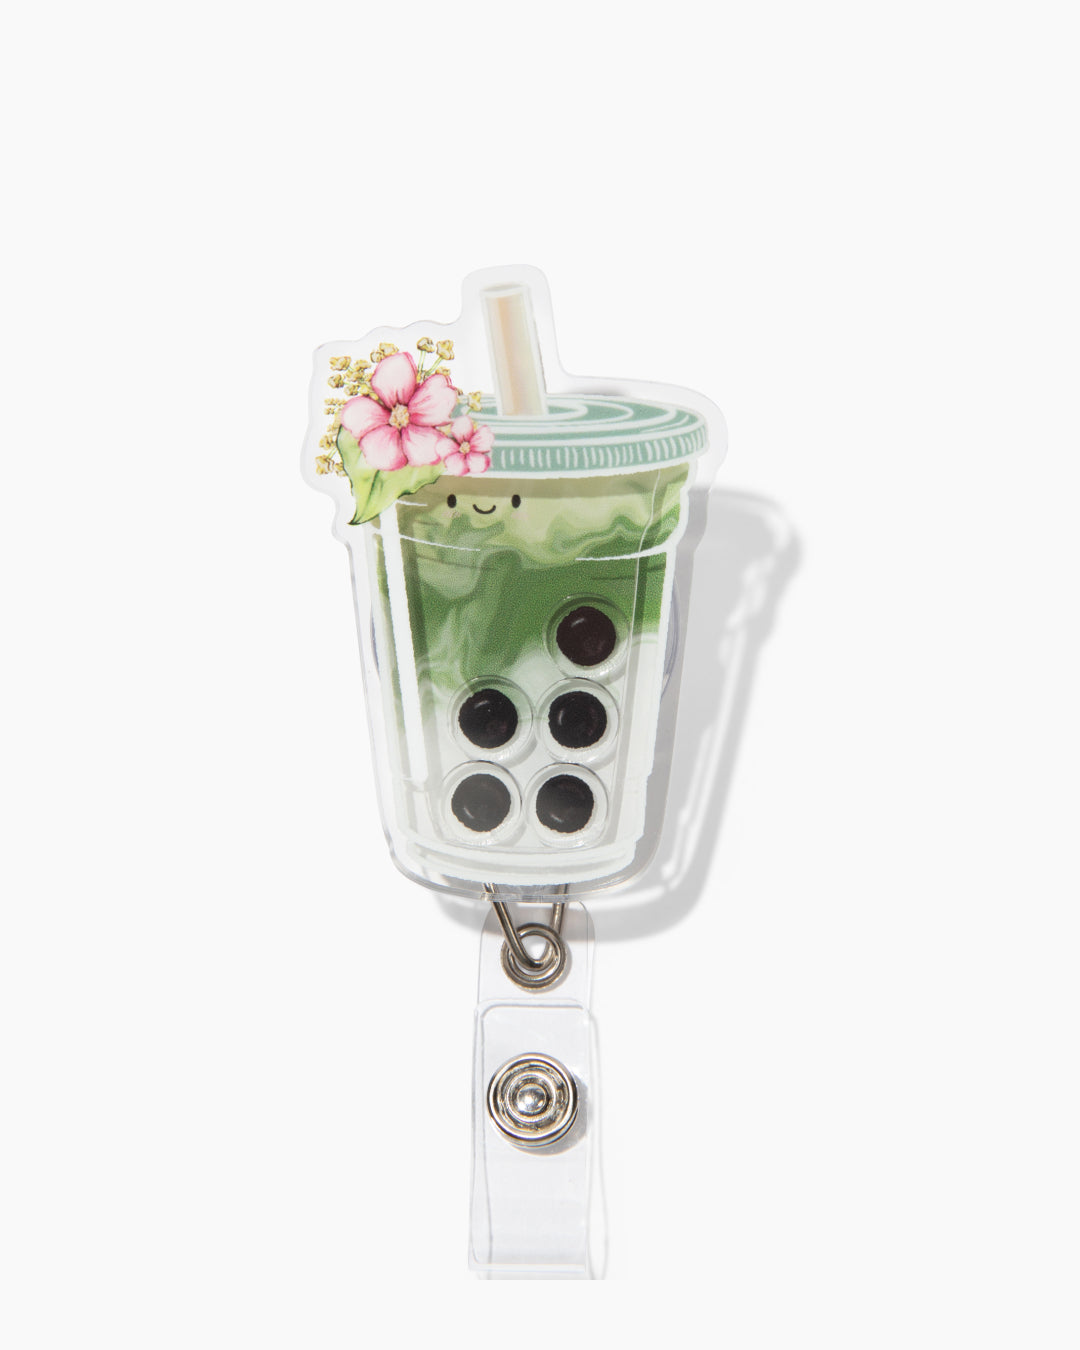 Check out our new Boba badge, reel phone grip starter kit. This is all, Boba